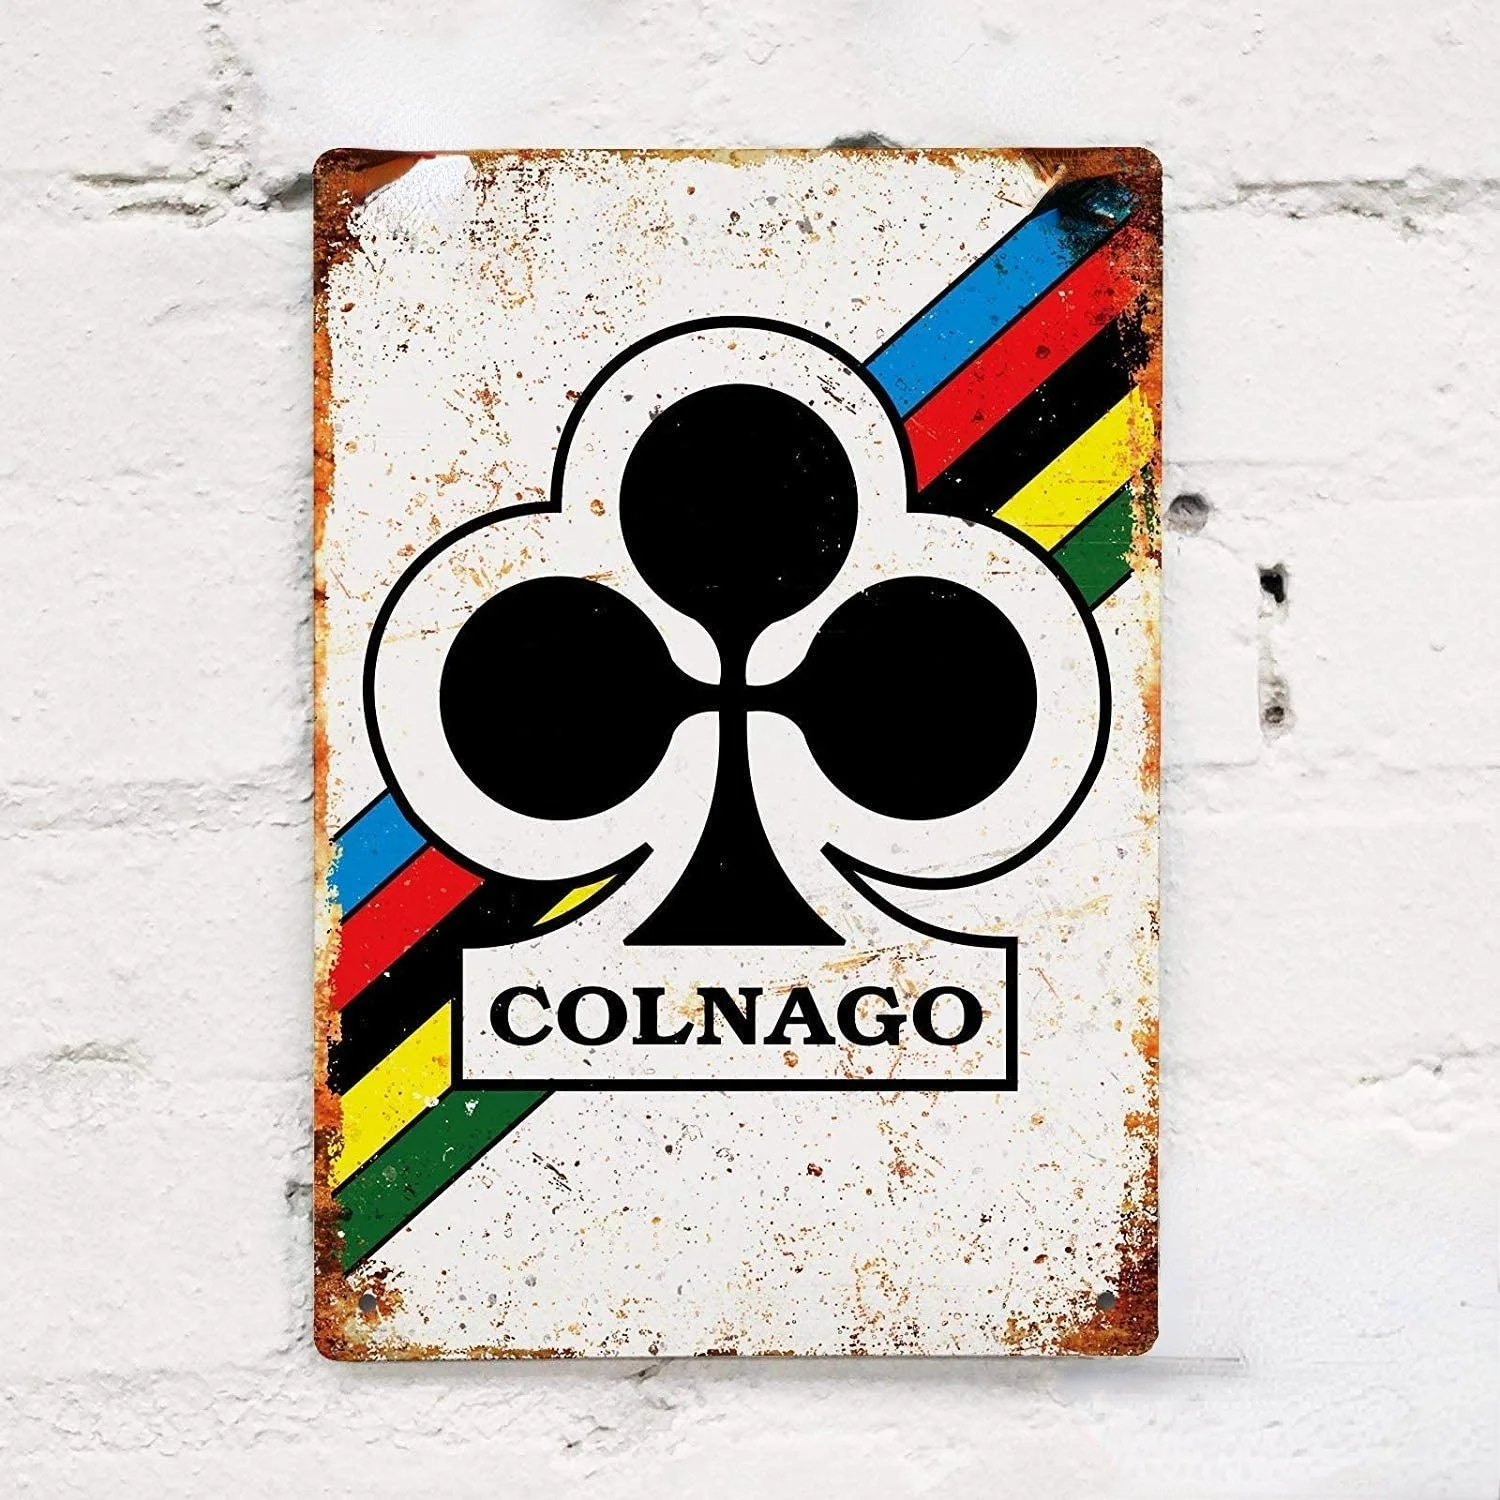 

Colnago Bike Cycling Retro Metal Tin Sign Plaque Poster Wall Decor Art Shabby Chic Gift 1